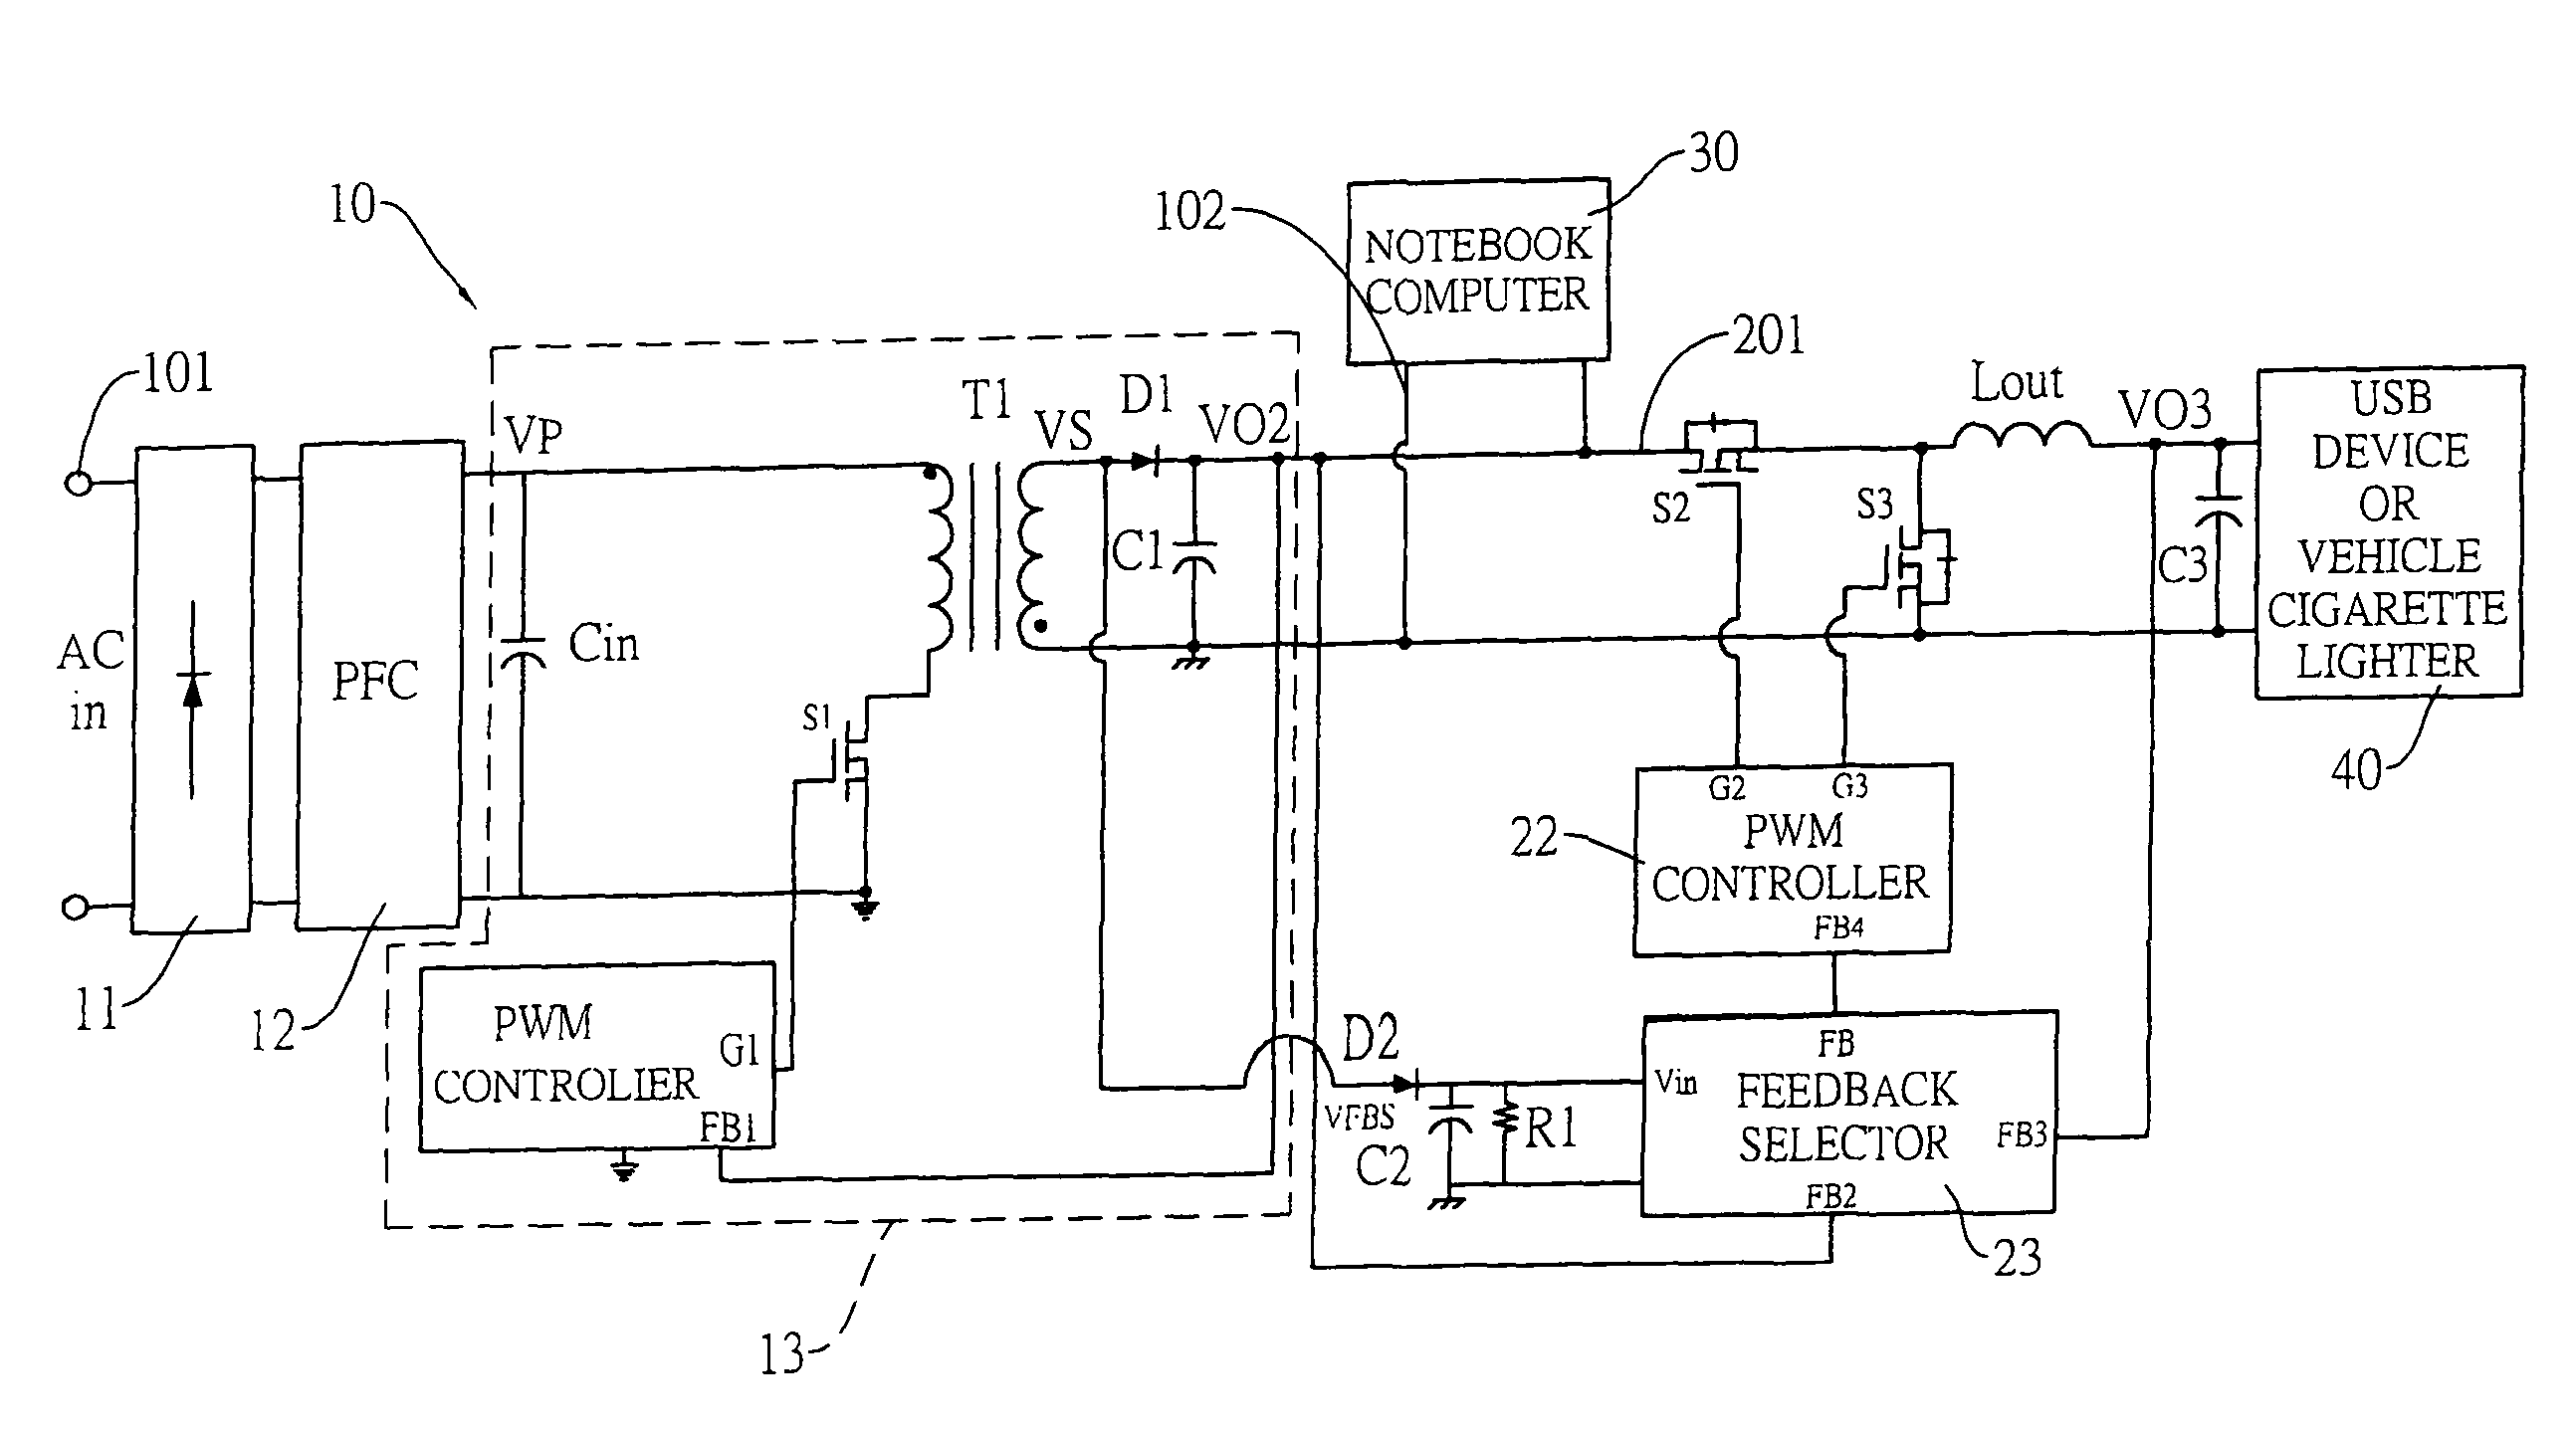 Power supply having a two-way DC to DC converter